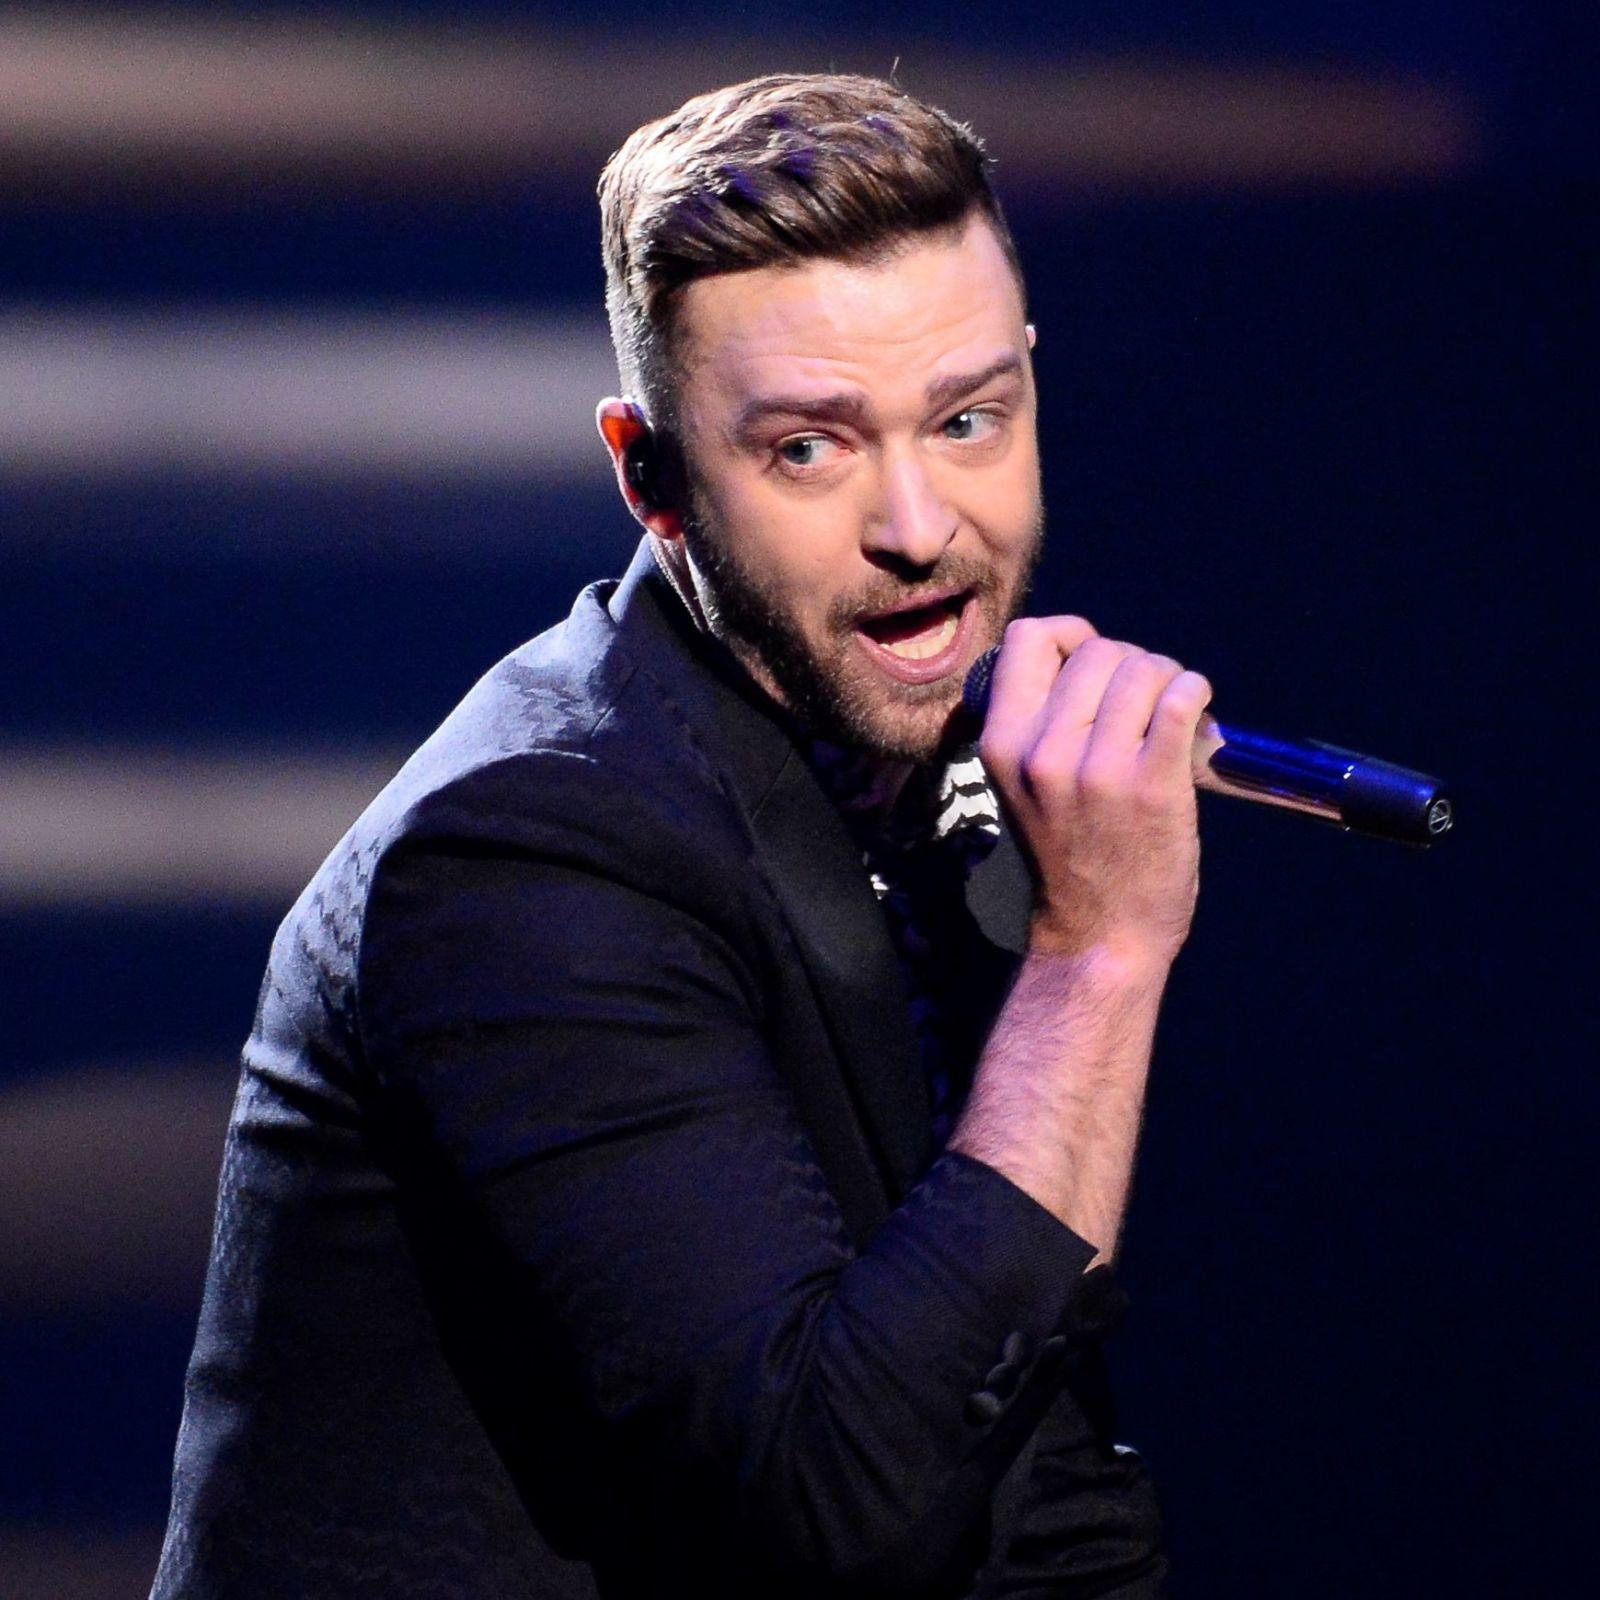 Justin Timberlake Deserved to Be Dragged for His Jesse Williams Tweets